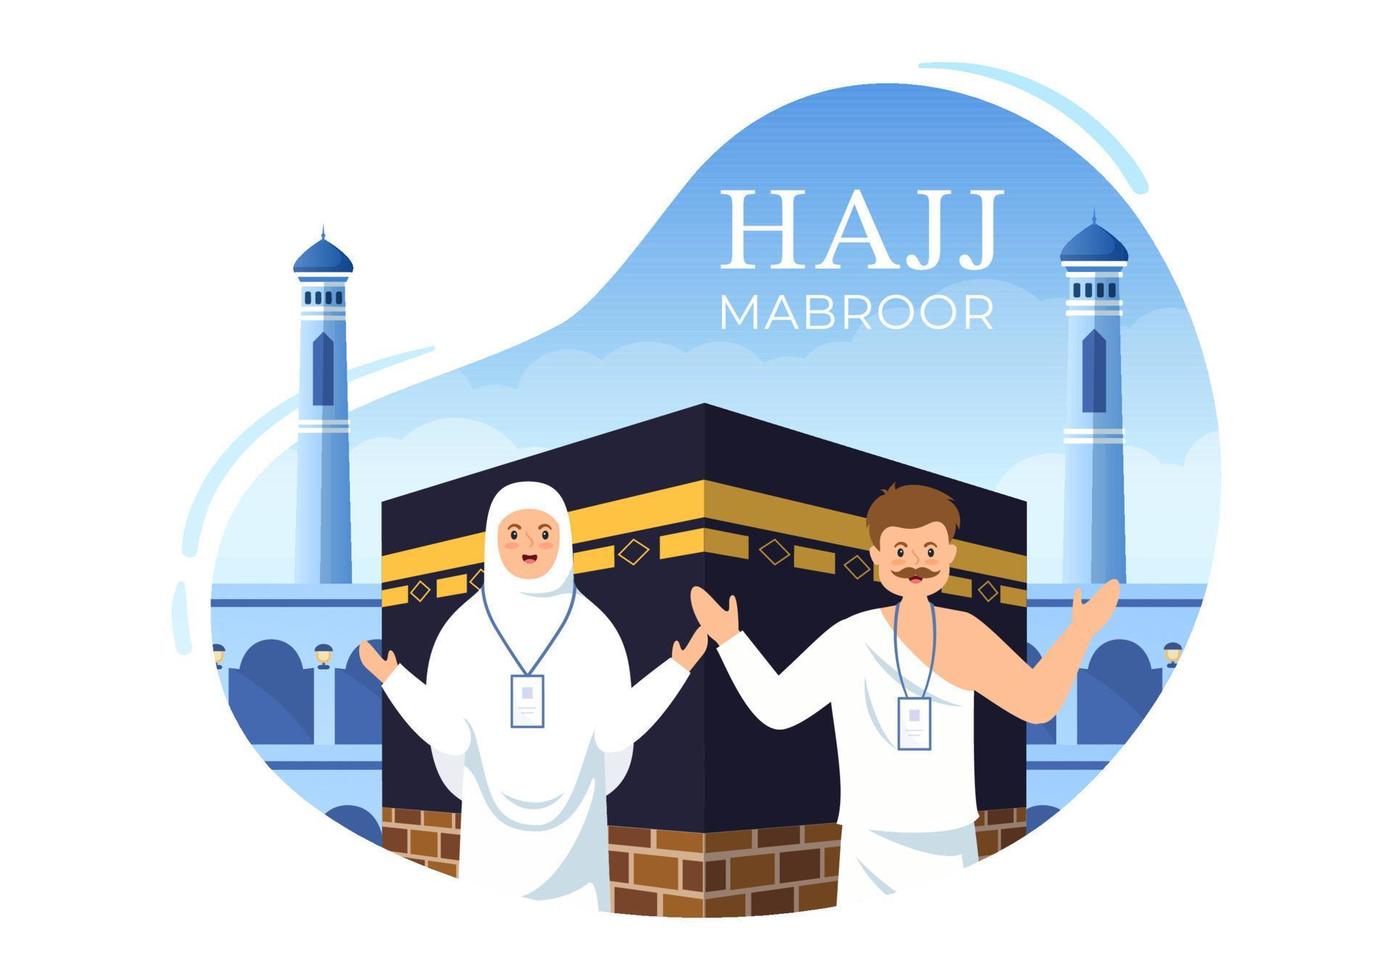 Hajj or Umrah Mabroor Cartoon Illustration with People Character and Makkah Kaaba Suitable for Poster or Landing Page Templates vector